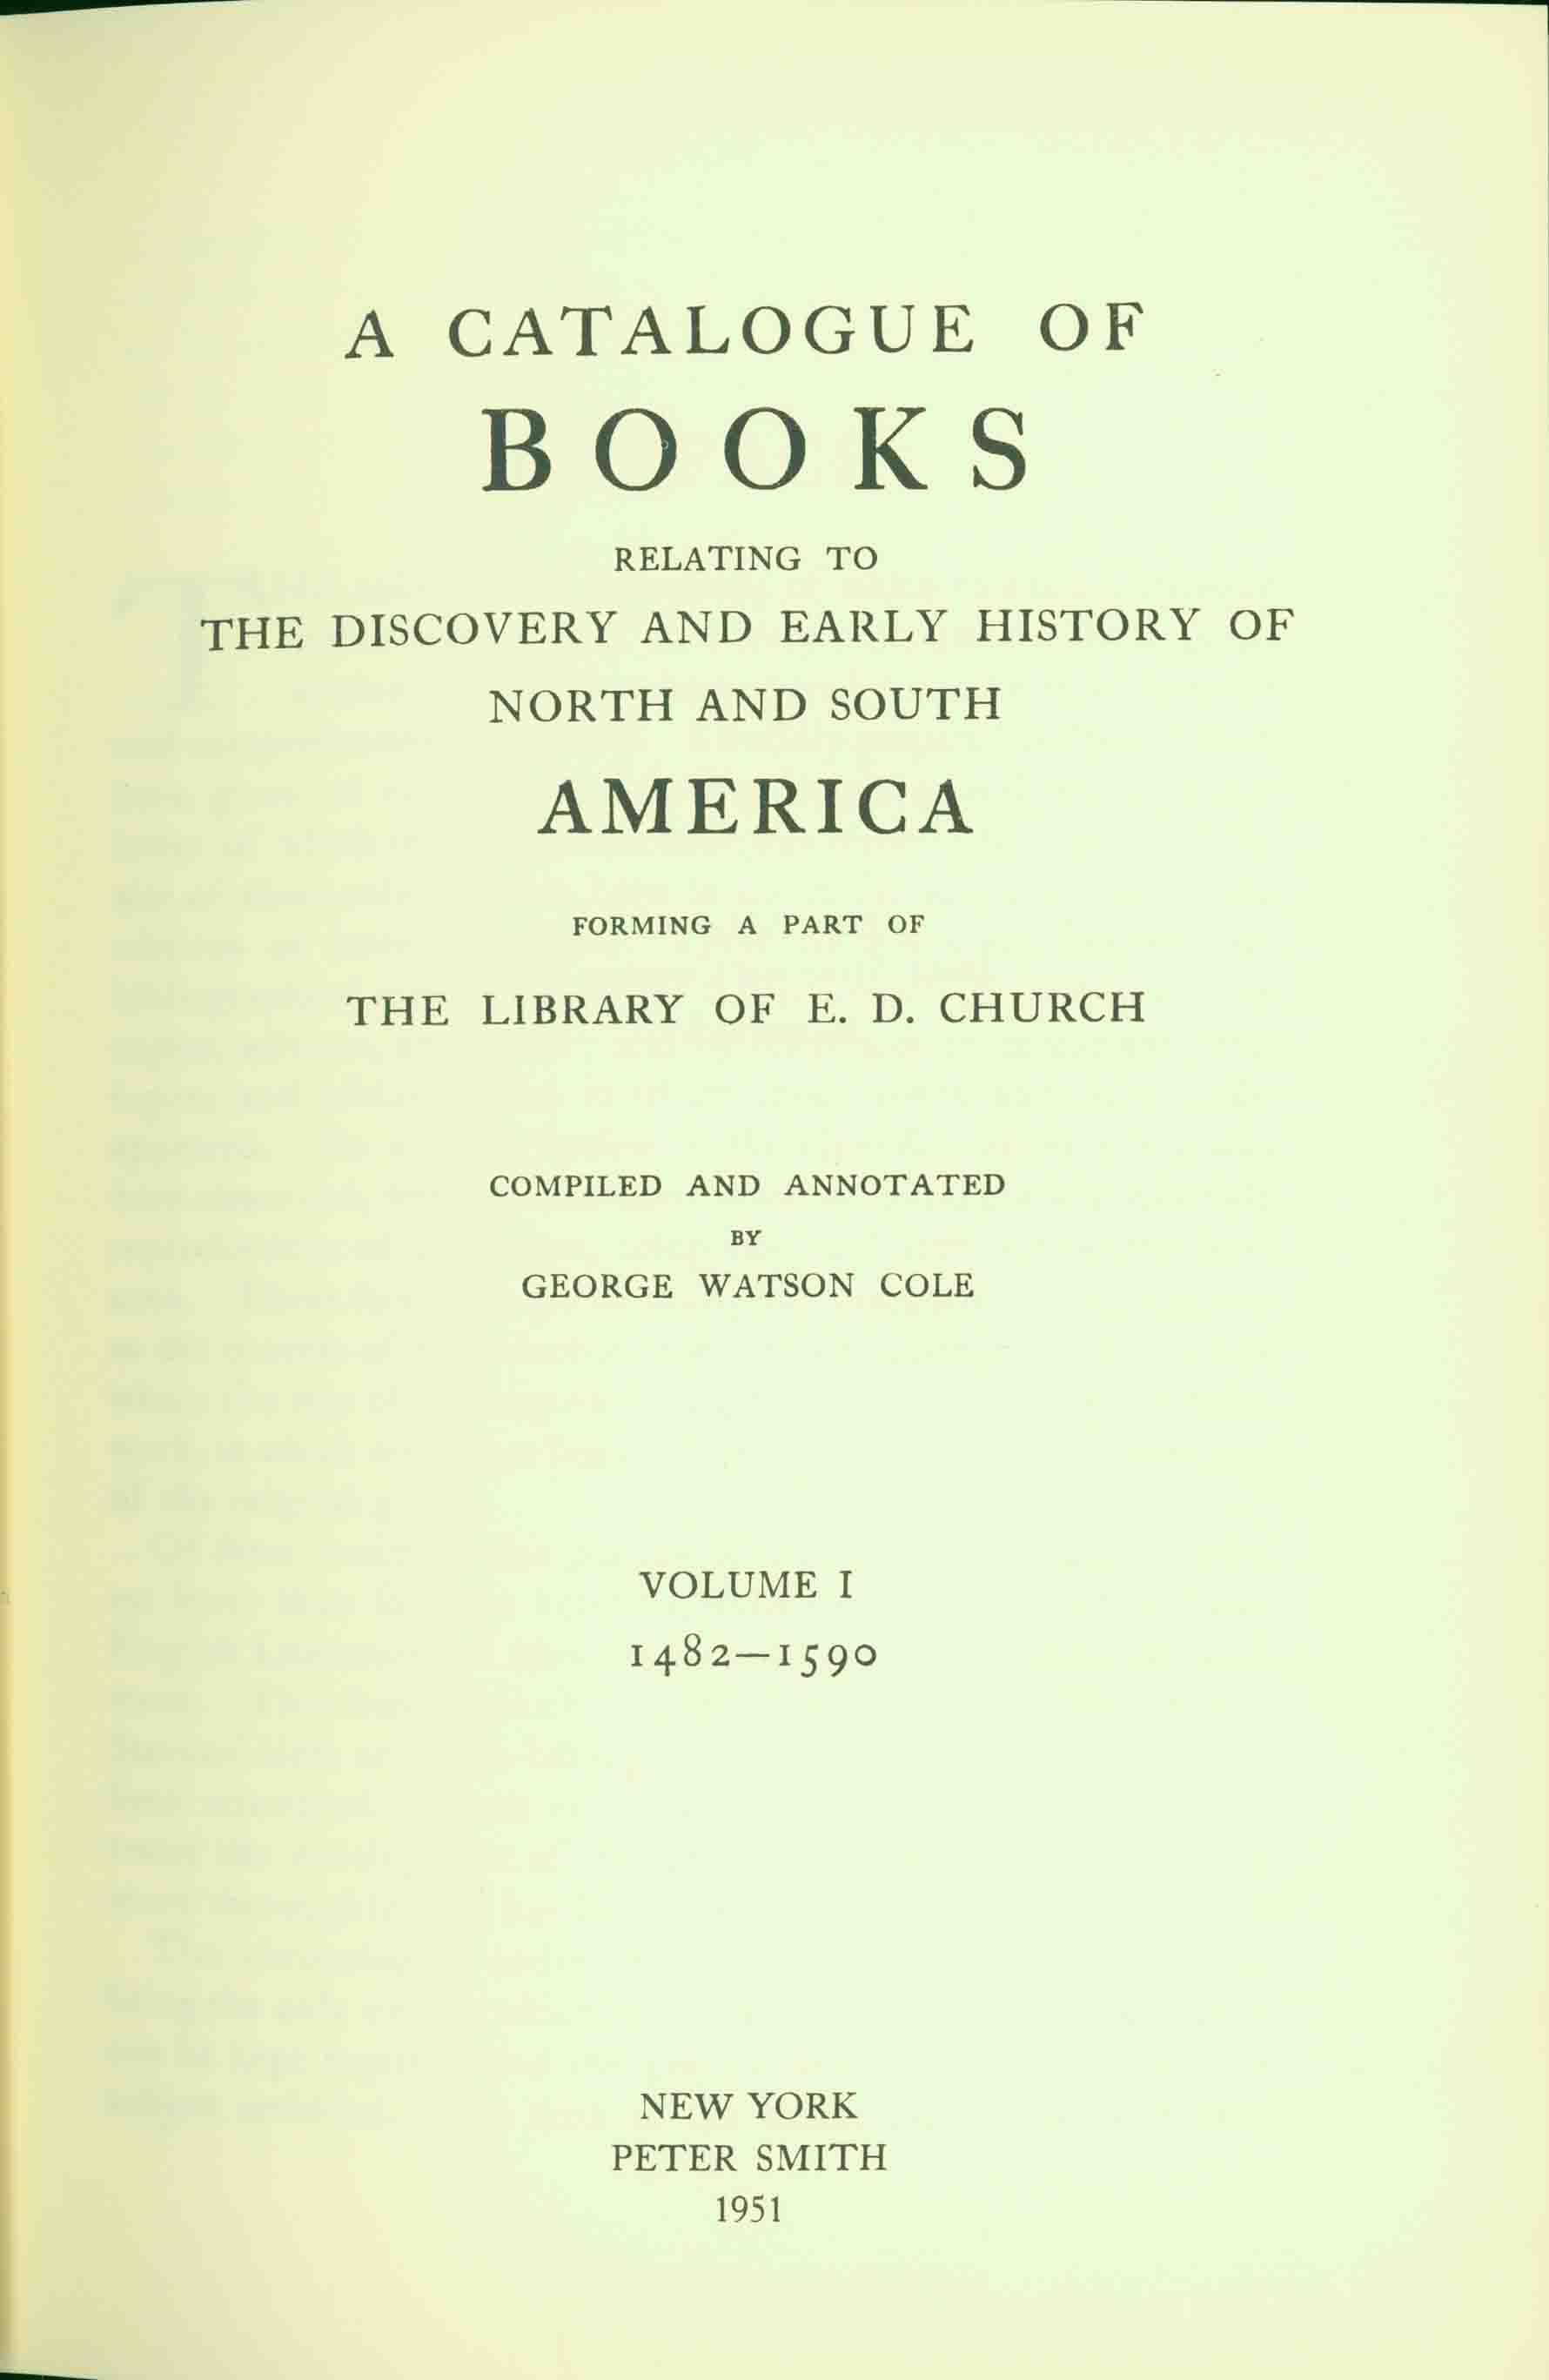 A Catalogue of Books Relating to the Discovery and Early History of North  and South America Forming A Part of The Library of E. D. Church, George  Watson Cole, compiled and